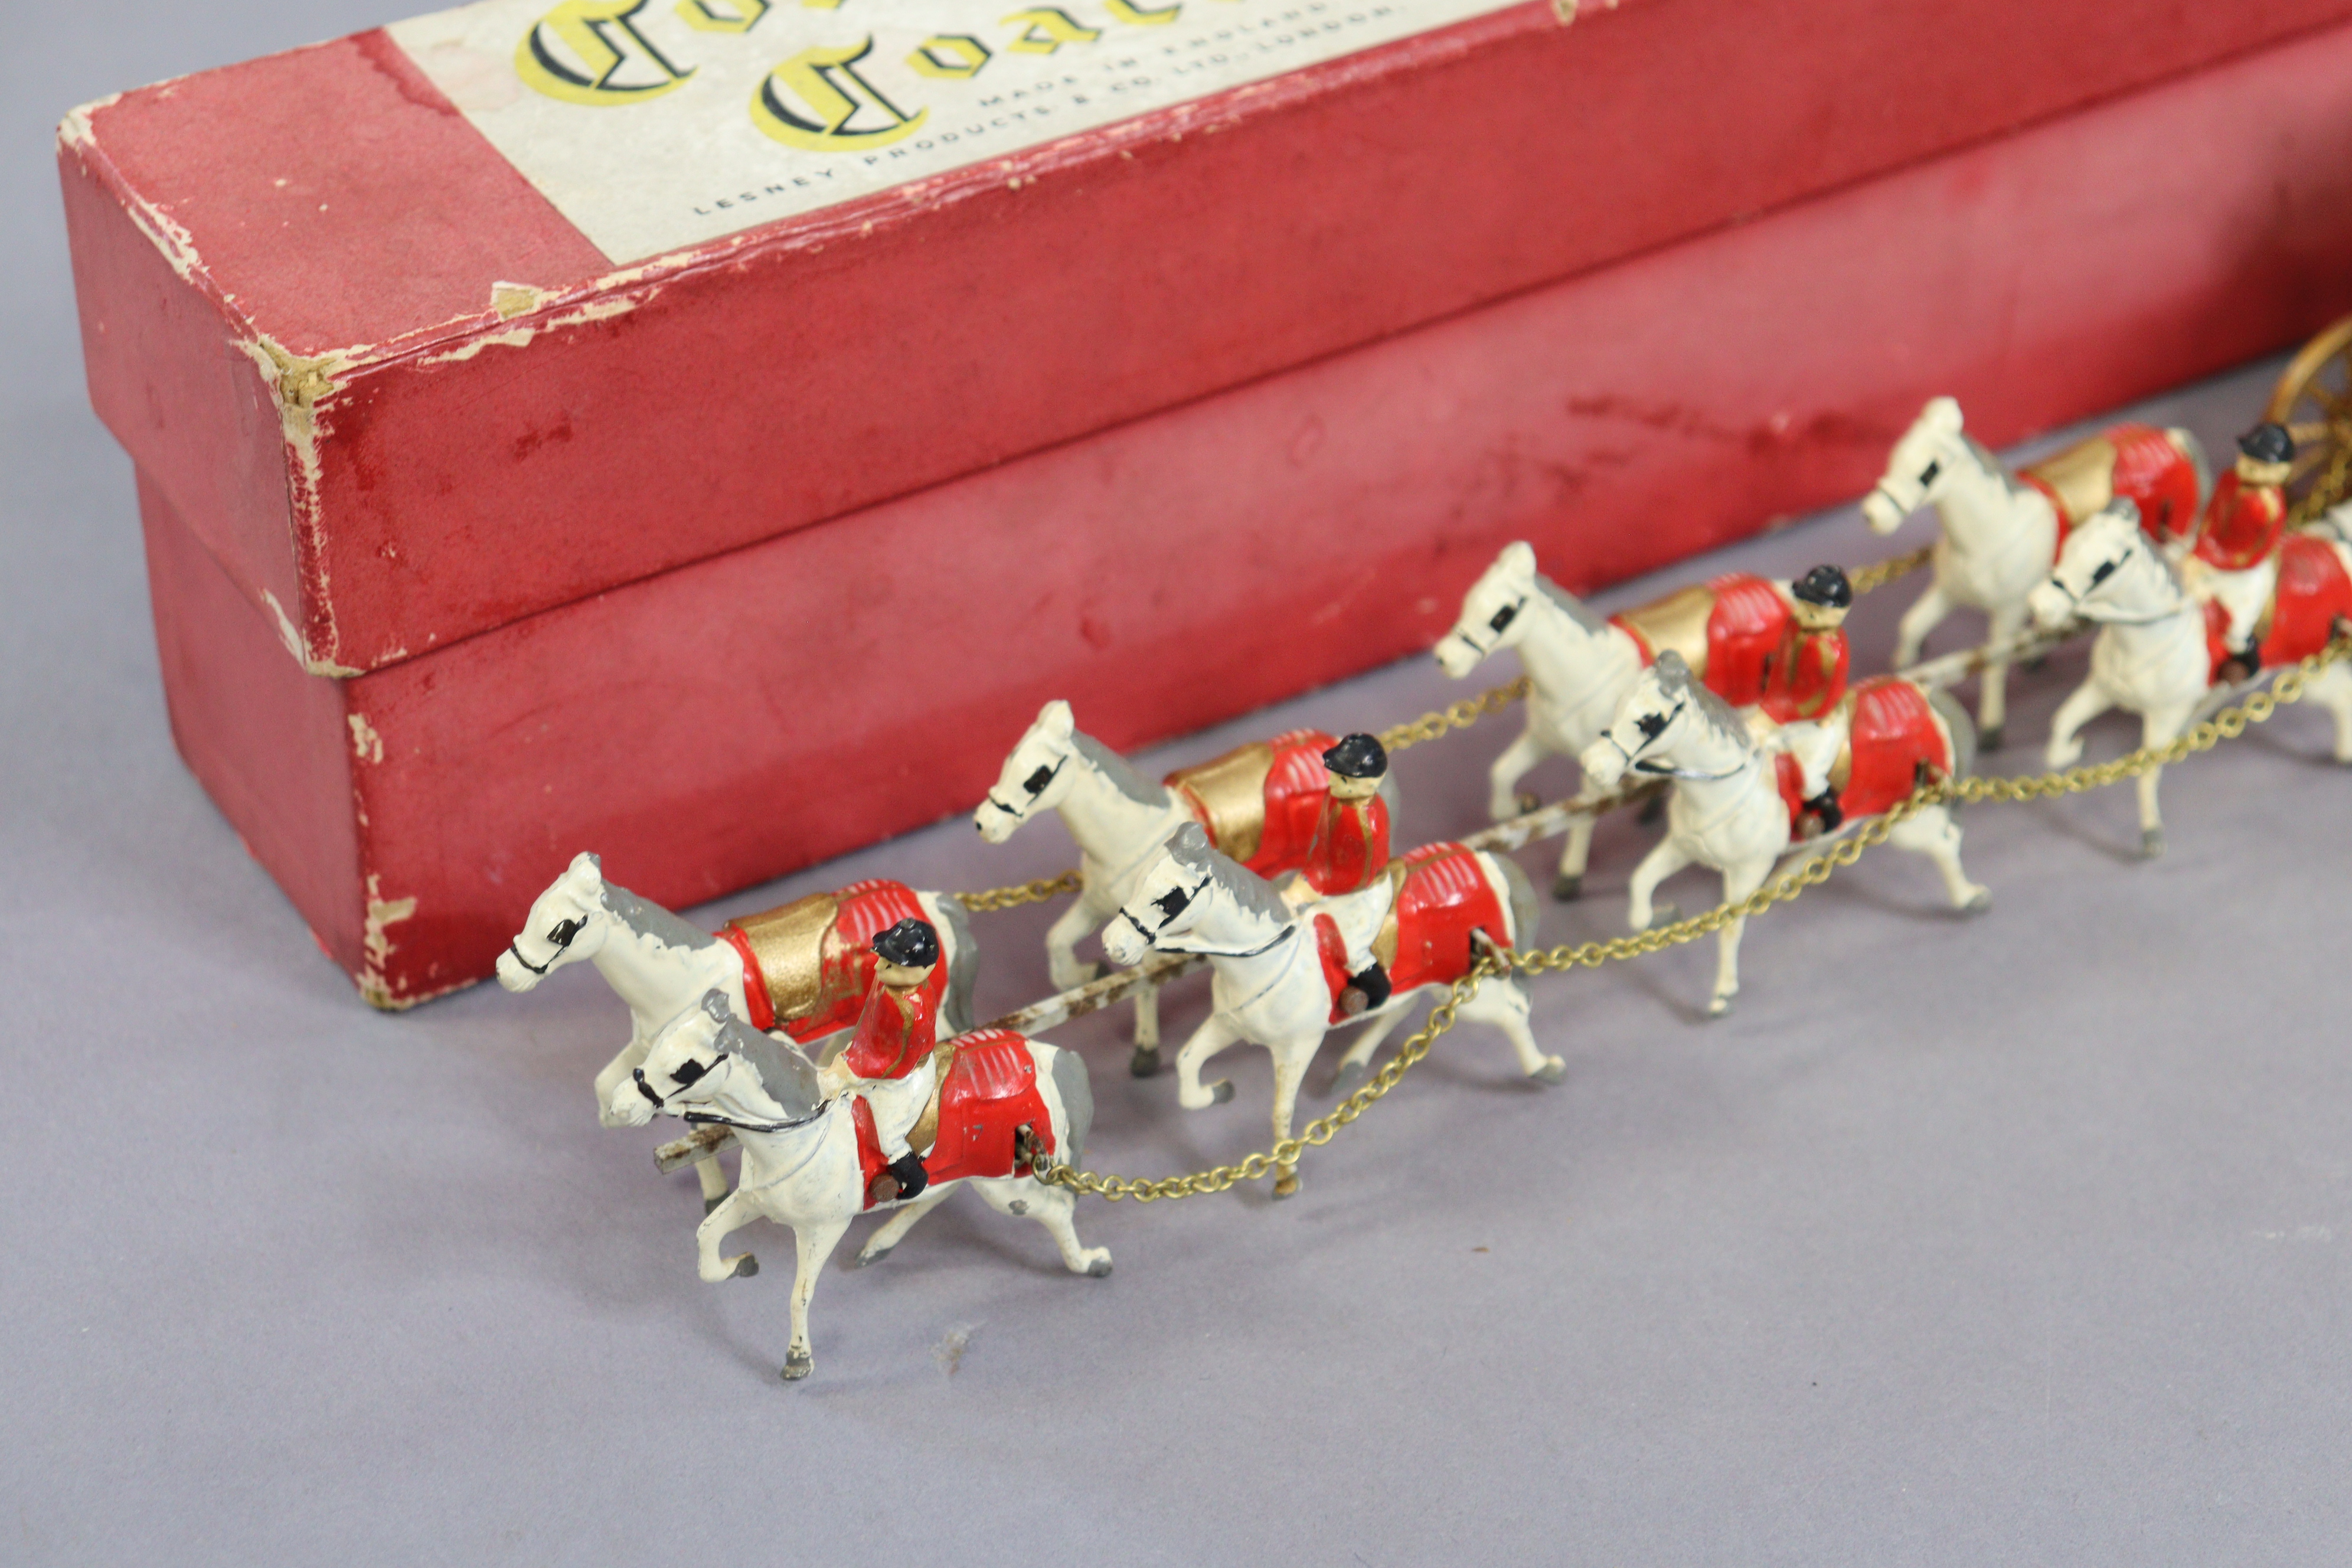 A vintage Lesney model of the “Coronation coach”, boxed. - Image 4 of 4